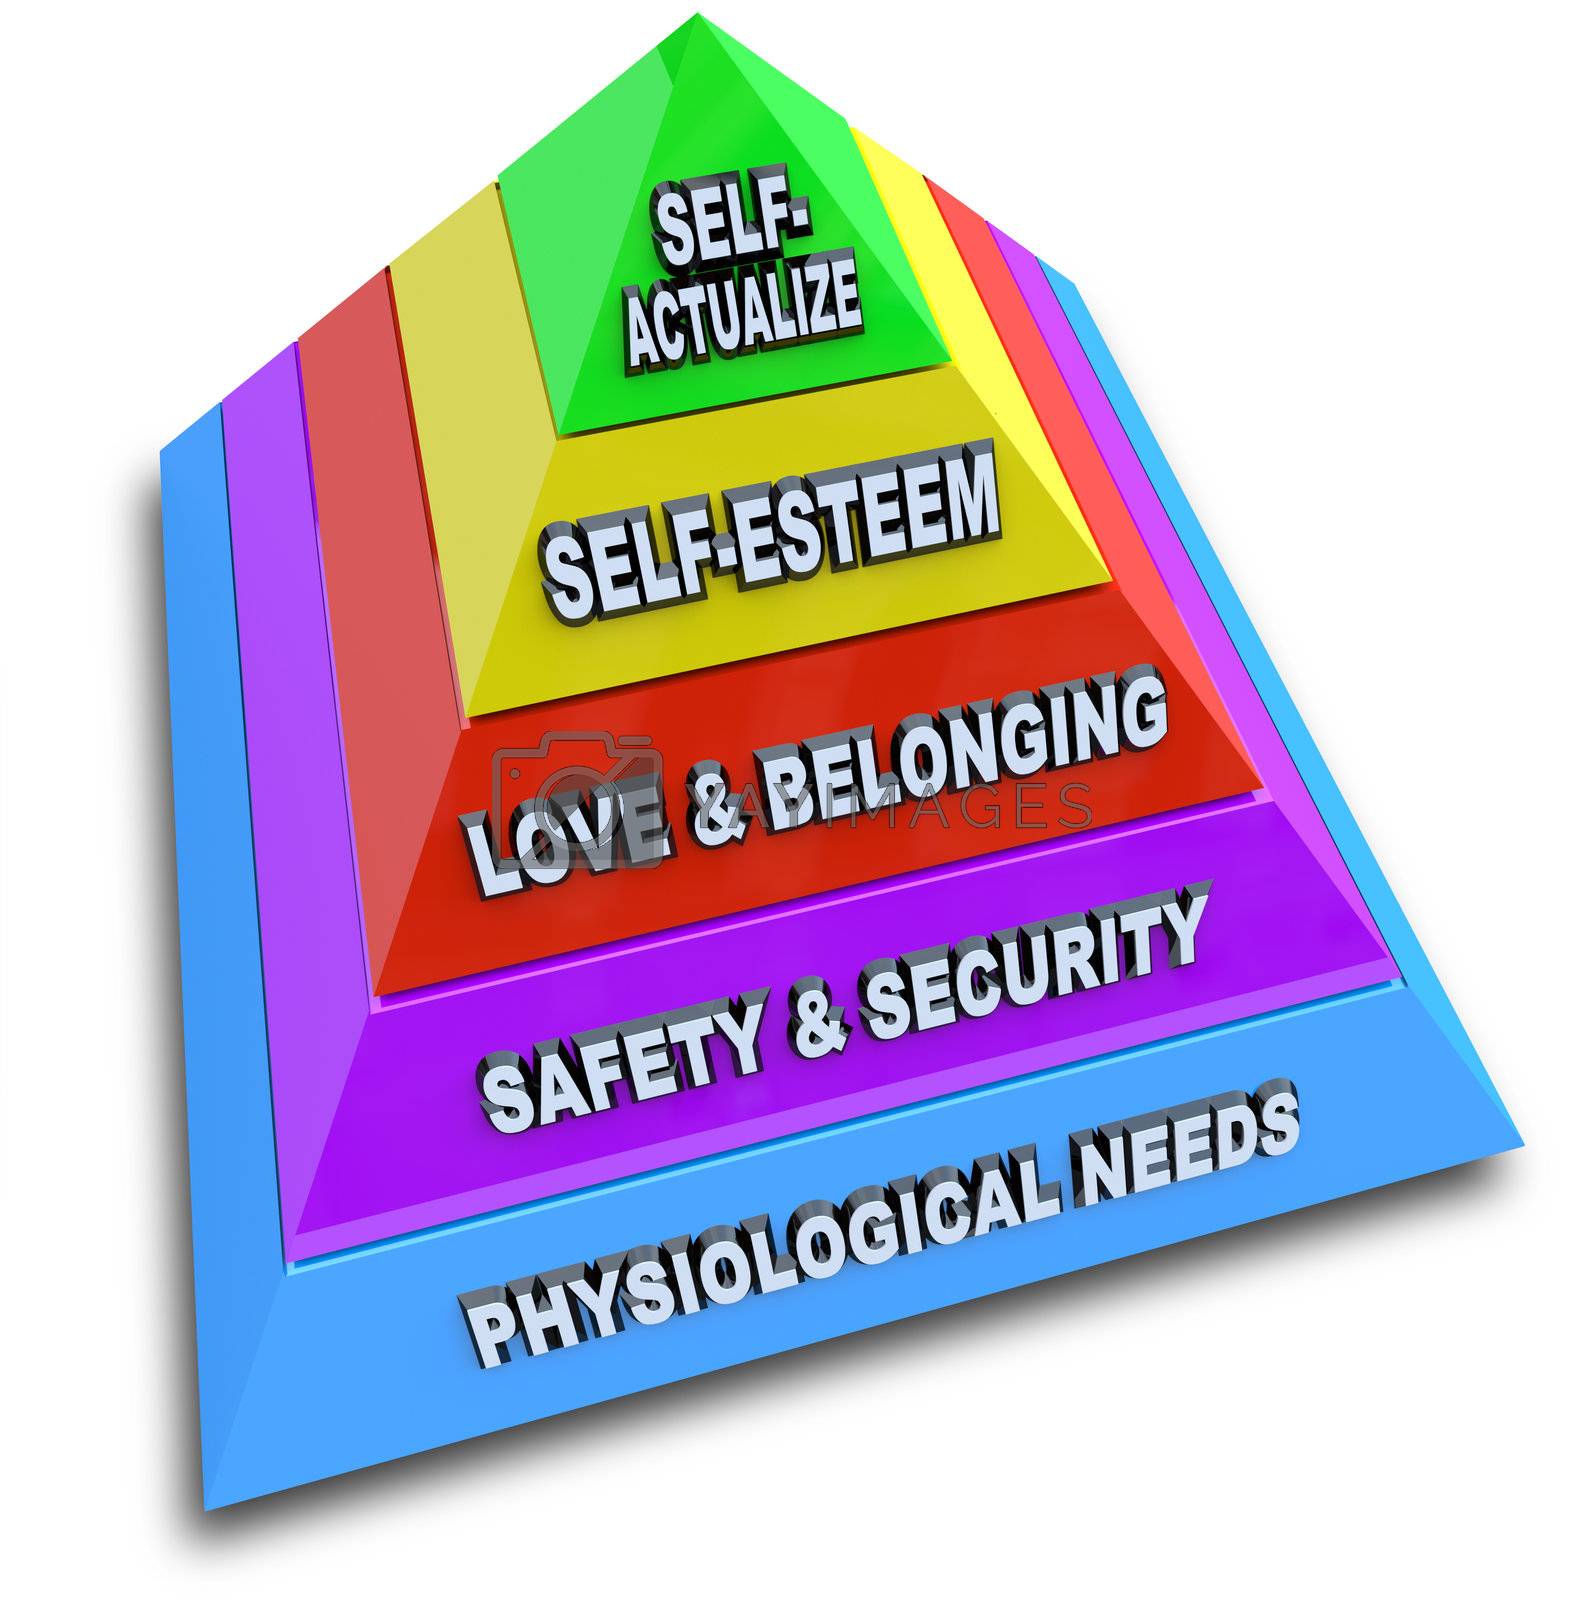 Royalty free image of Hierarchy of Needs Pyramid - Maslow's Theory Illustrated by iQoncept